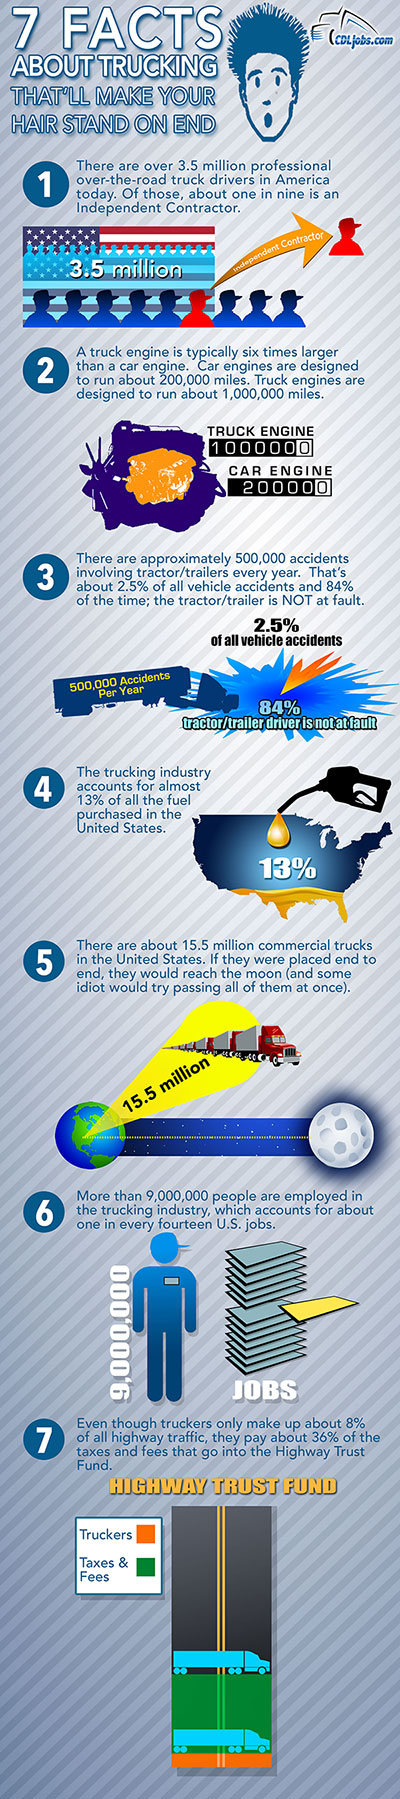 7 Facts Trucking Infographic | CDLjobs.com